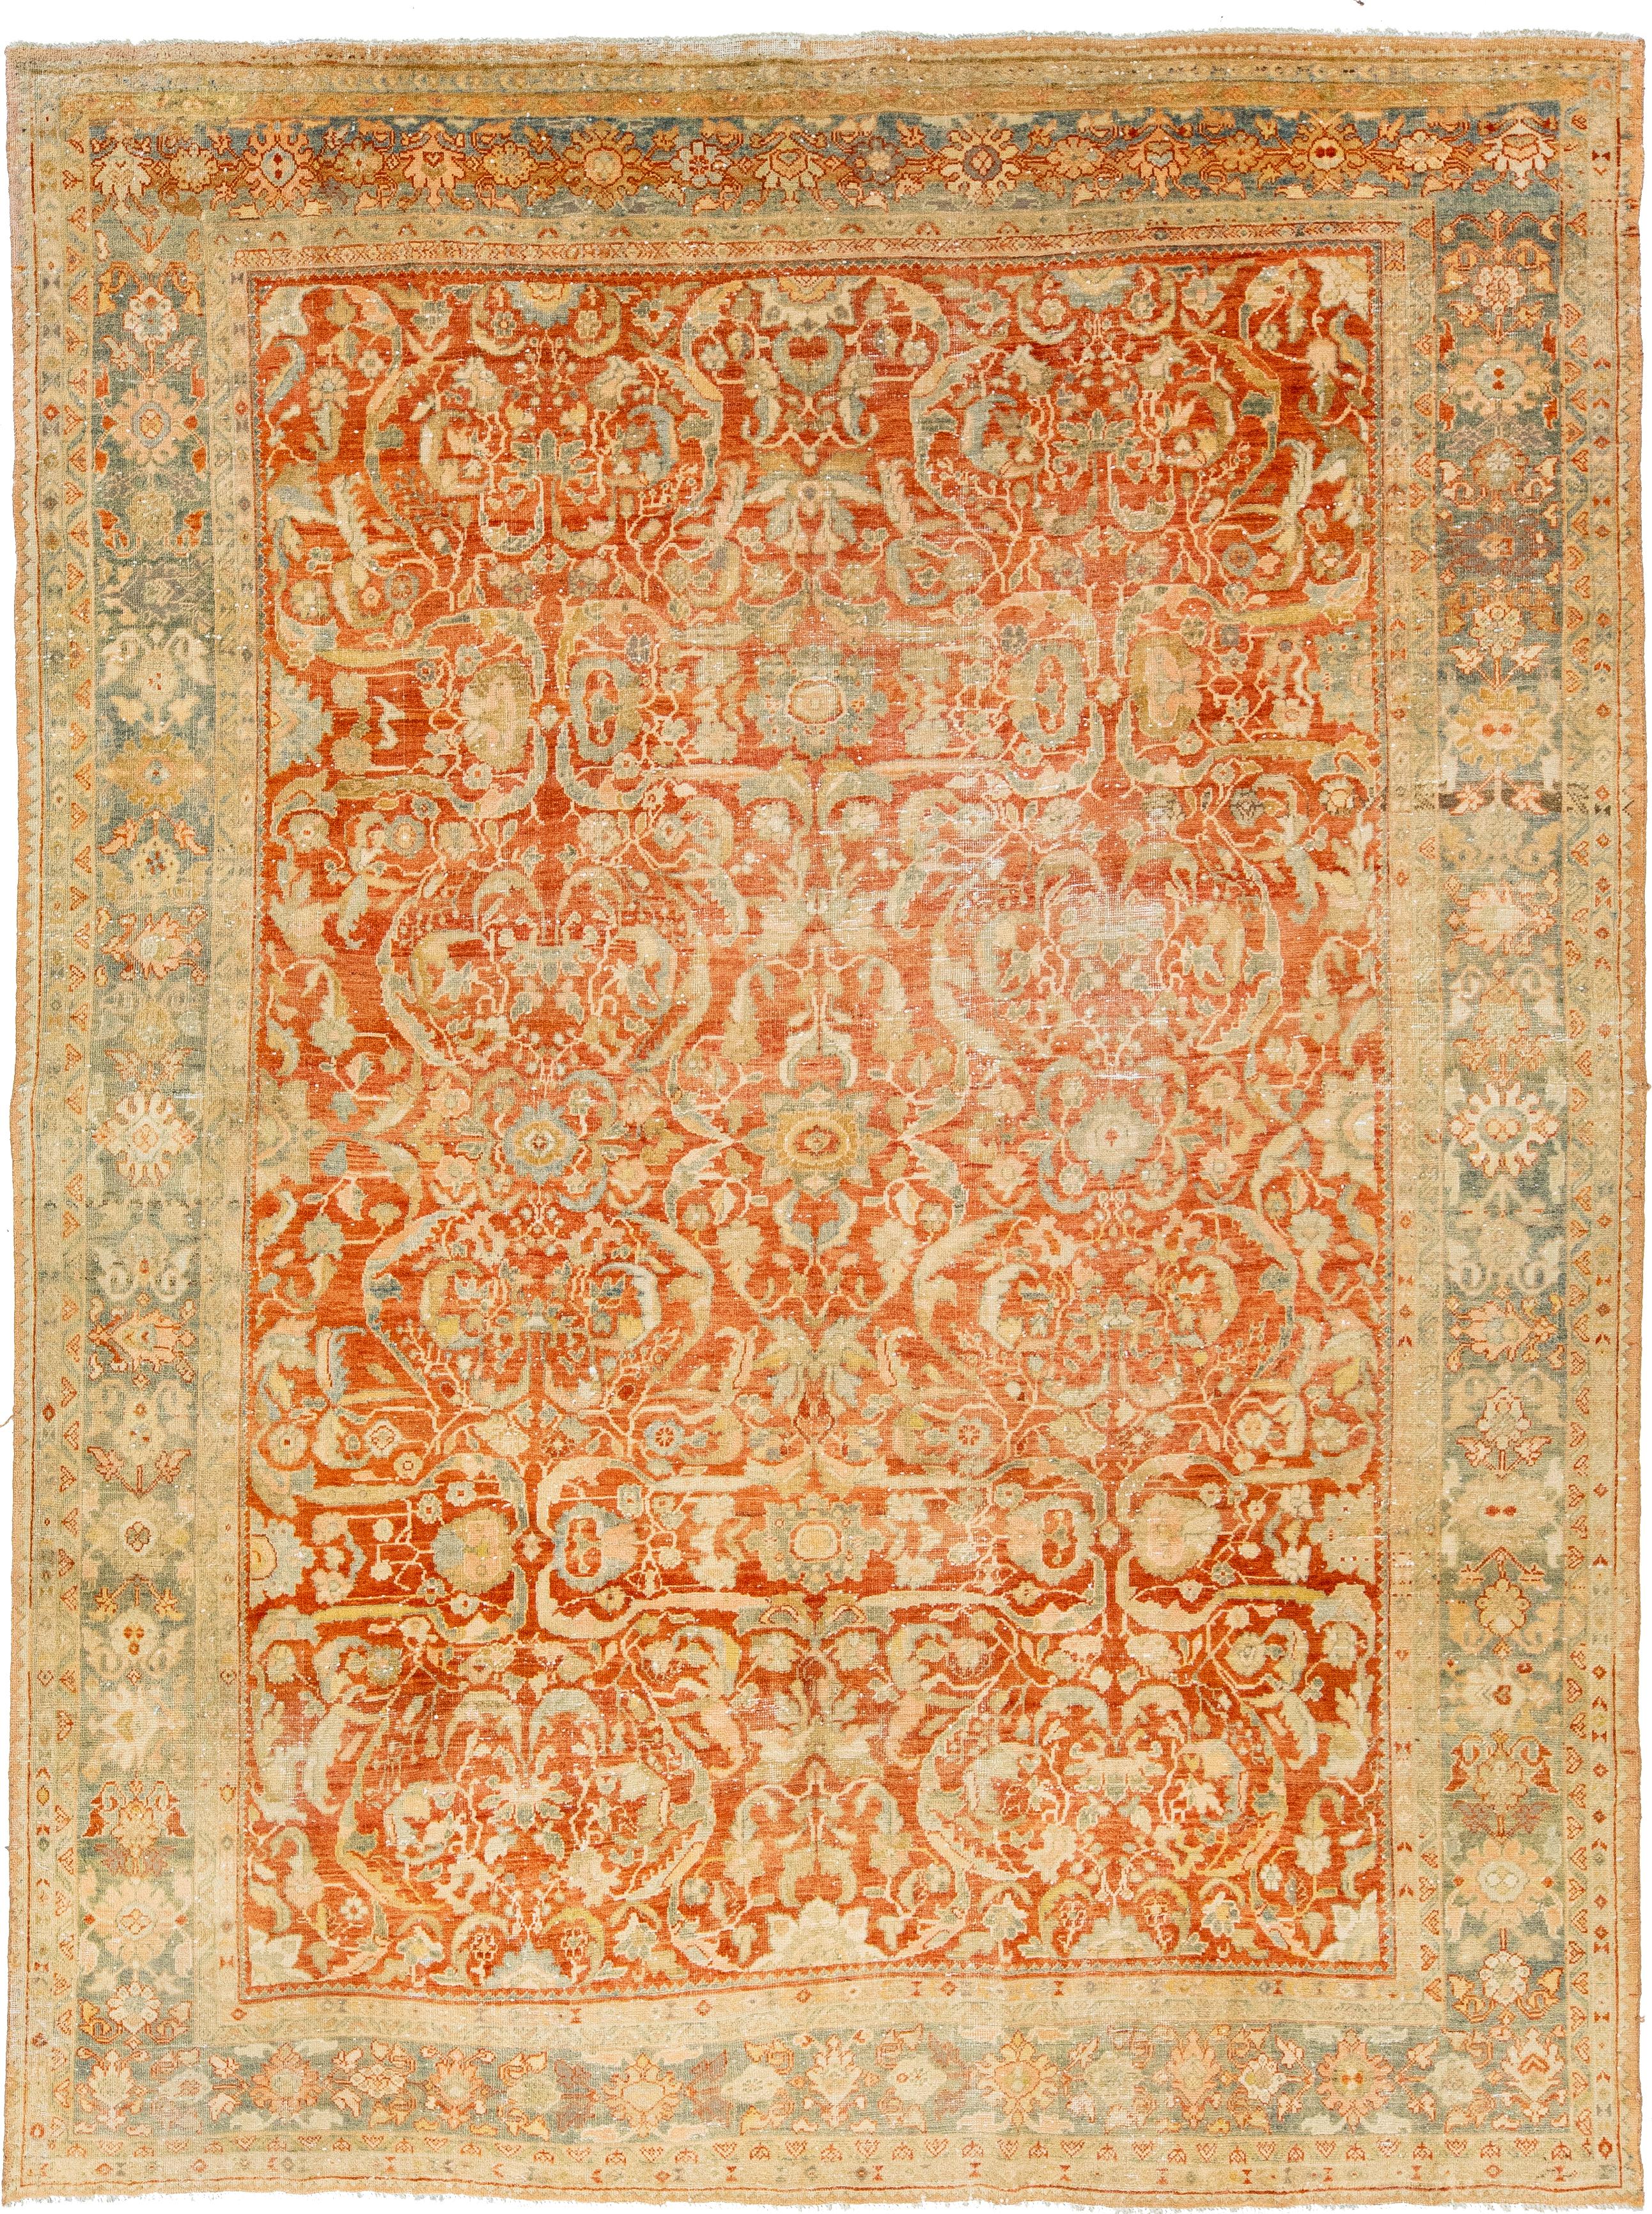 1920s Antique Persian Heriz Wool Rug In Rust With Allover Floral Design  For Sale 3